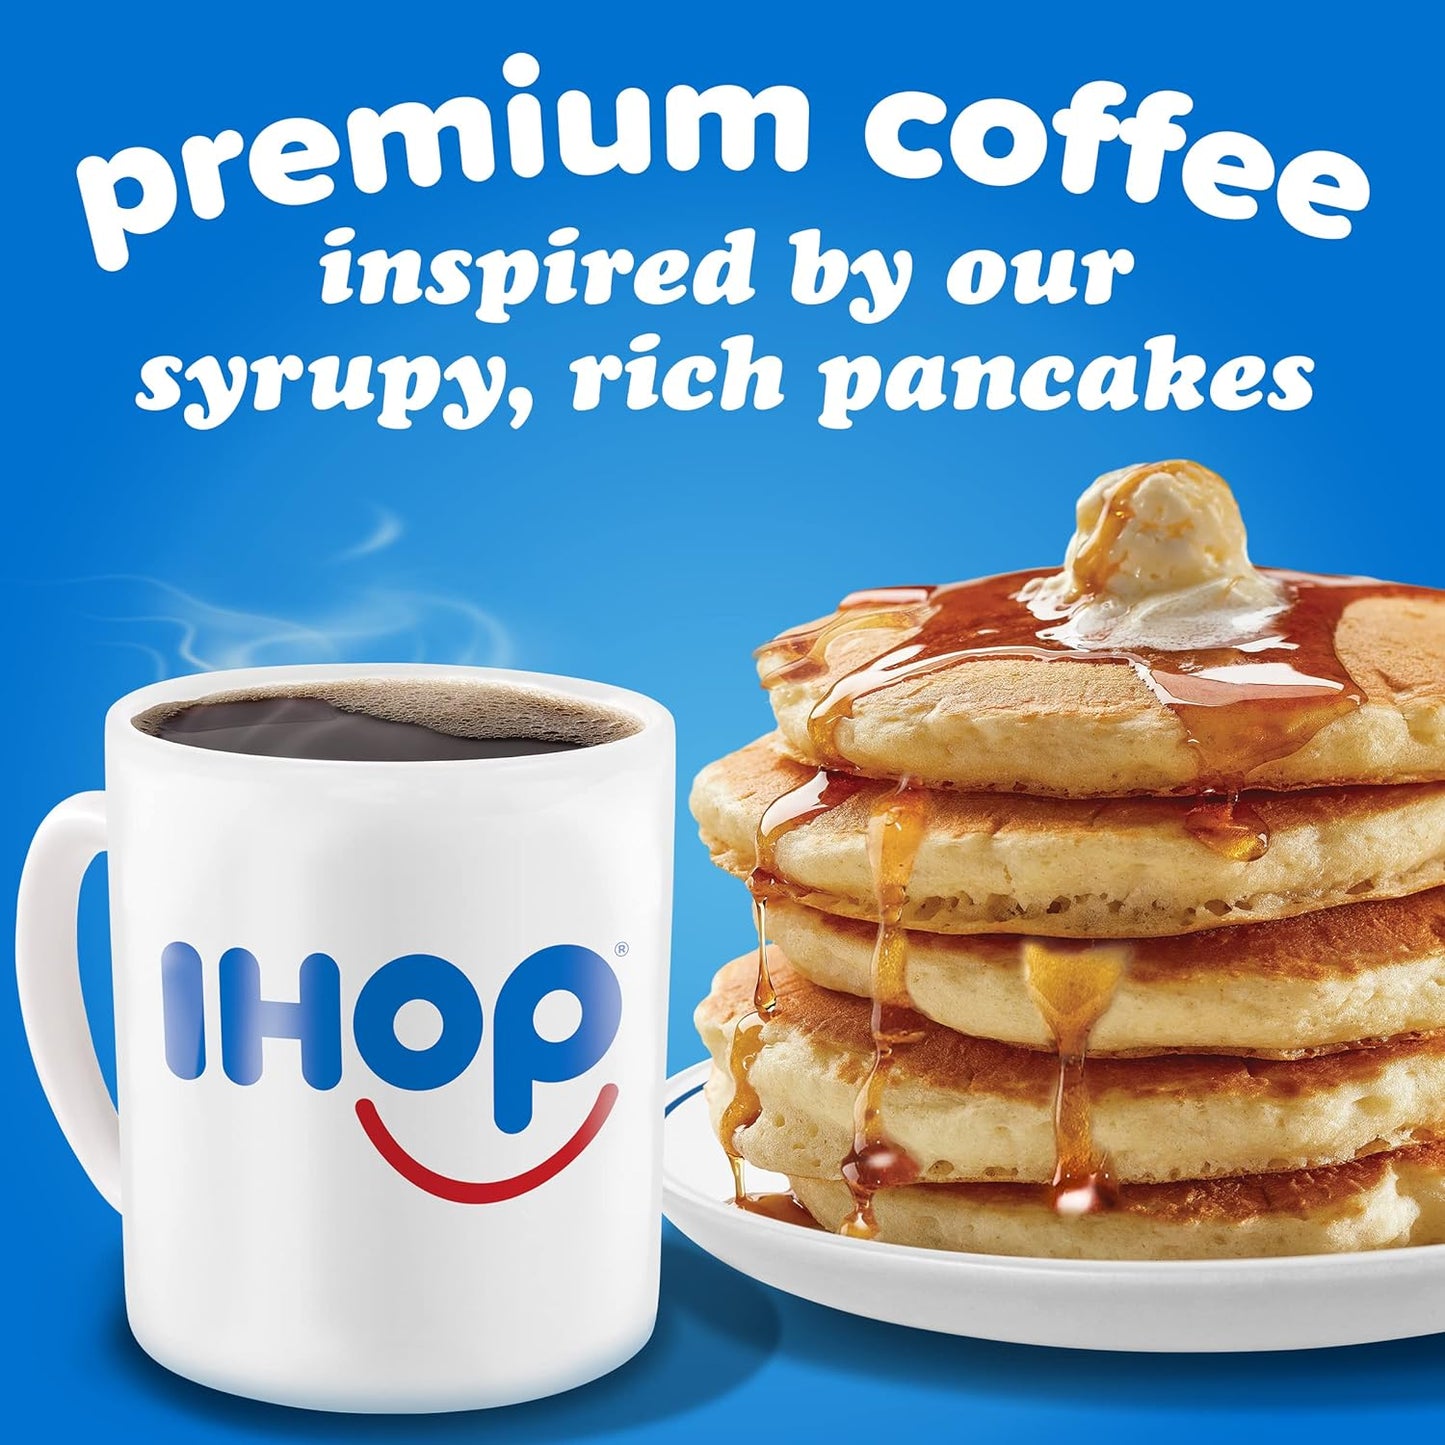 IHOP Buttery Syrup Flavored Ground Coffee, 11 oz Bag